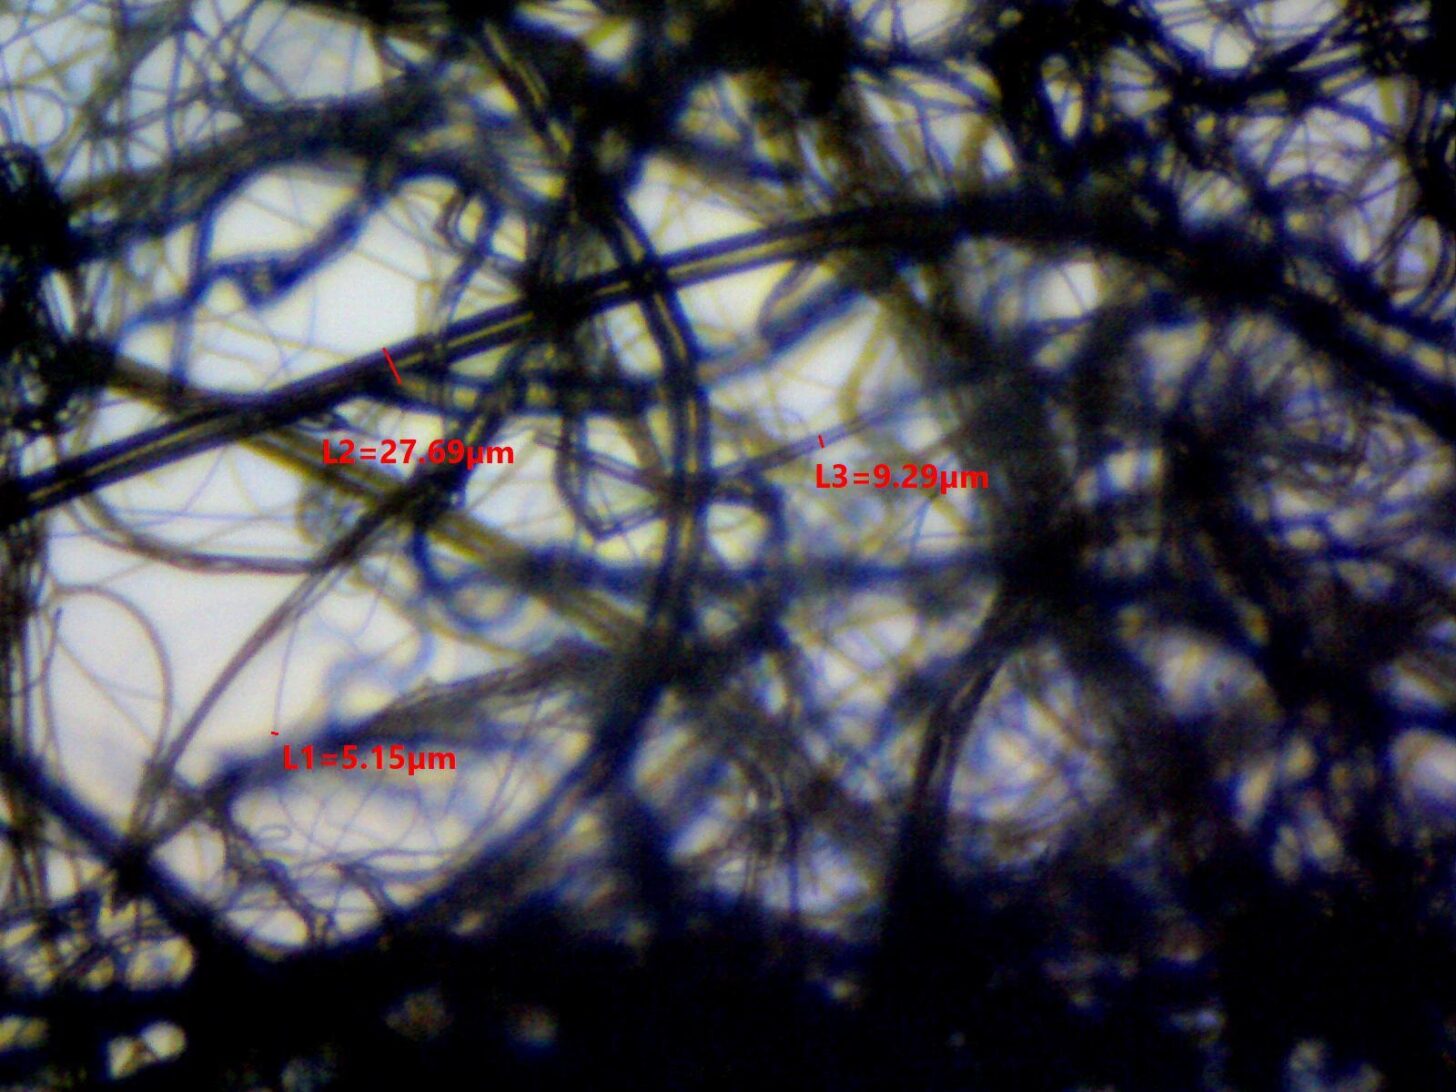 Thinsulate 200G photomicrograph showing fiber diameter measurements of 5.15, 9.29, and 27.69 microns.